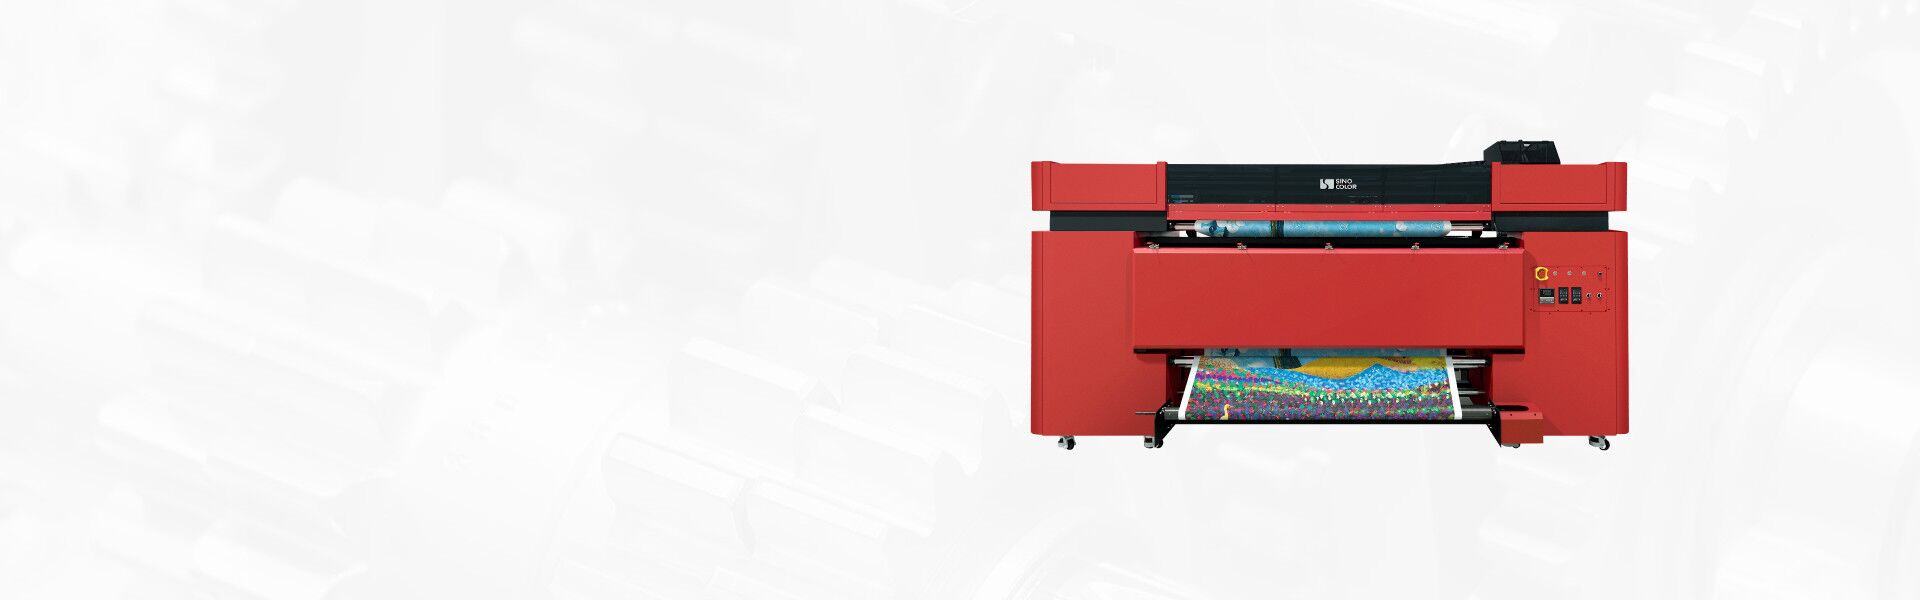 /products/textile-printer/direct-polyester-cotton-printer/direct-polyester-printer-fp-740p740s.html images